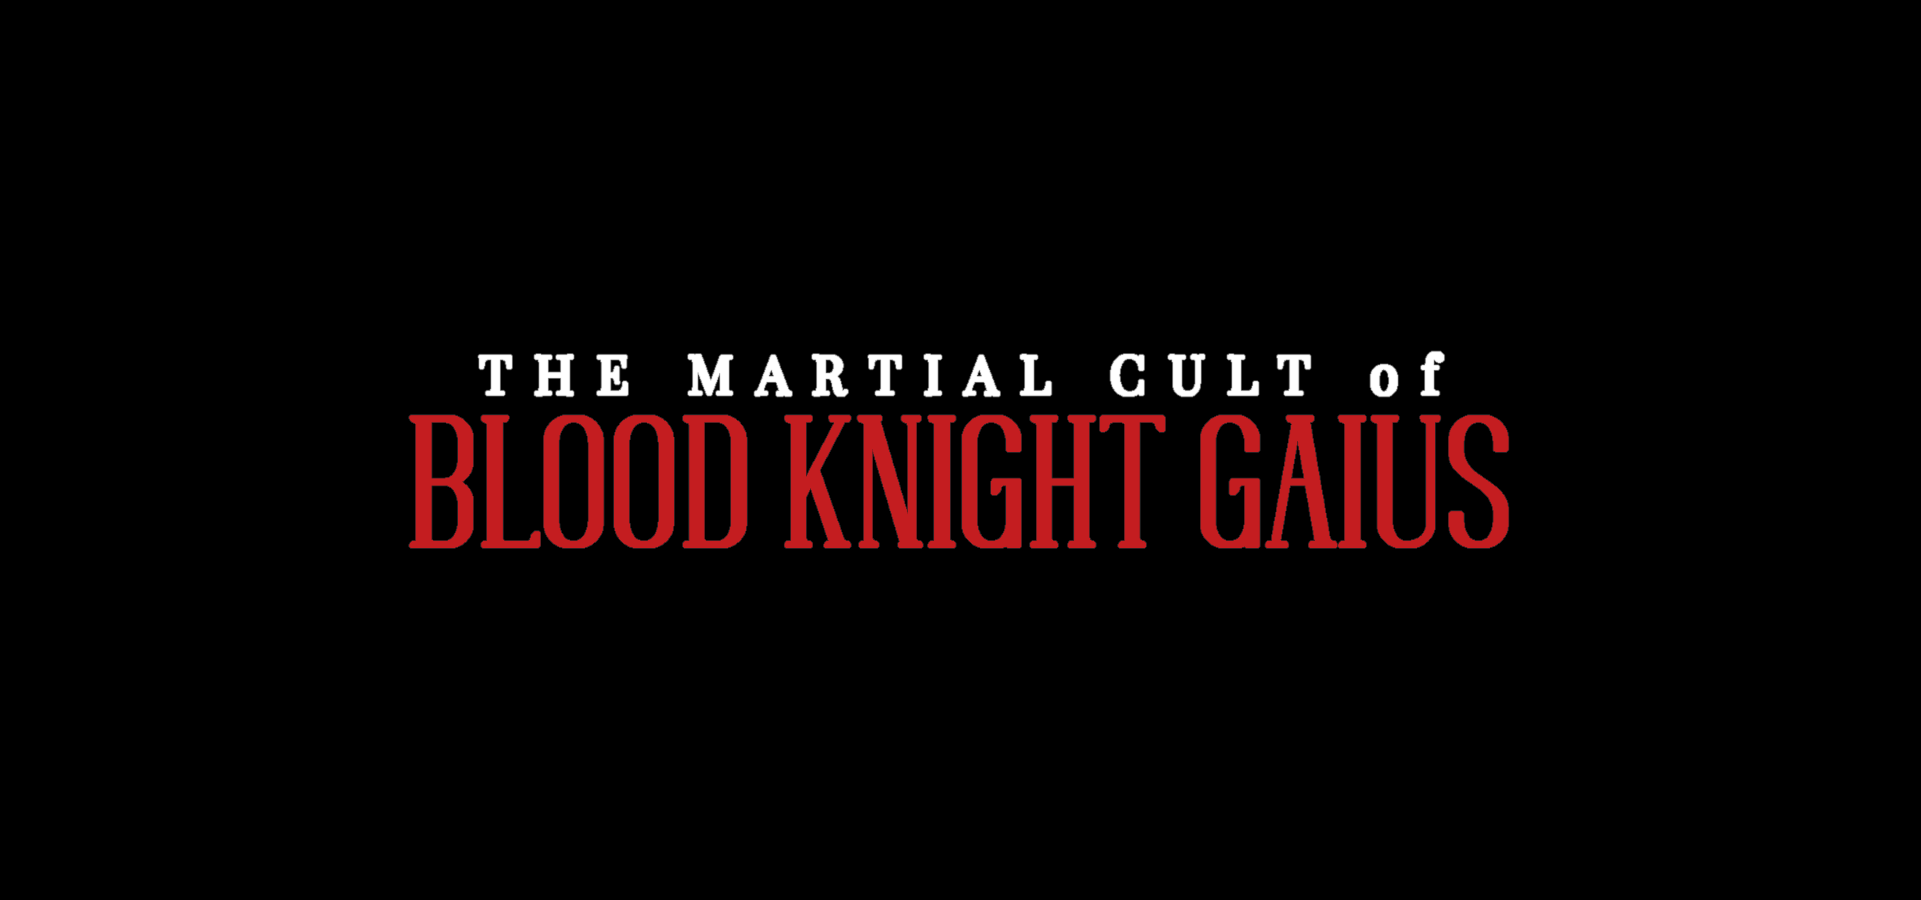 THE MARTIAL CULT of BLOOD KNIGHT GAIUS